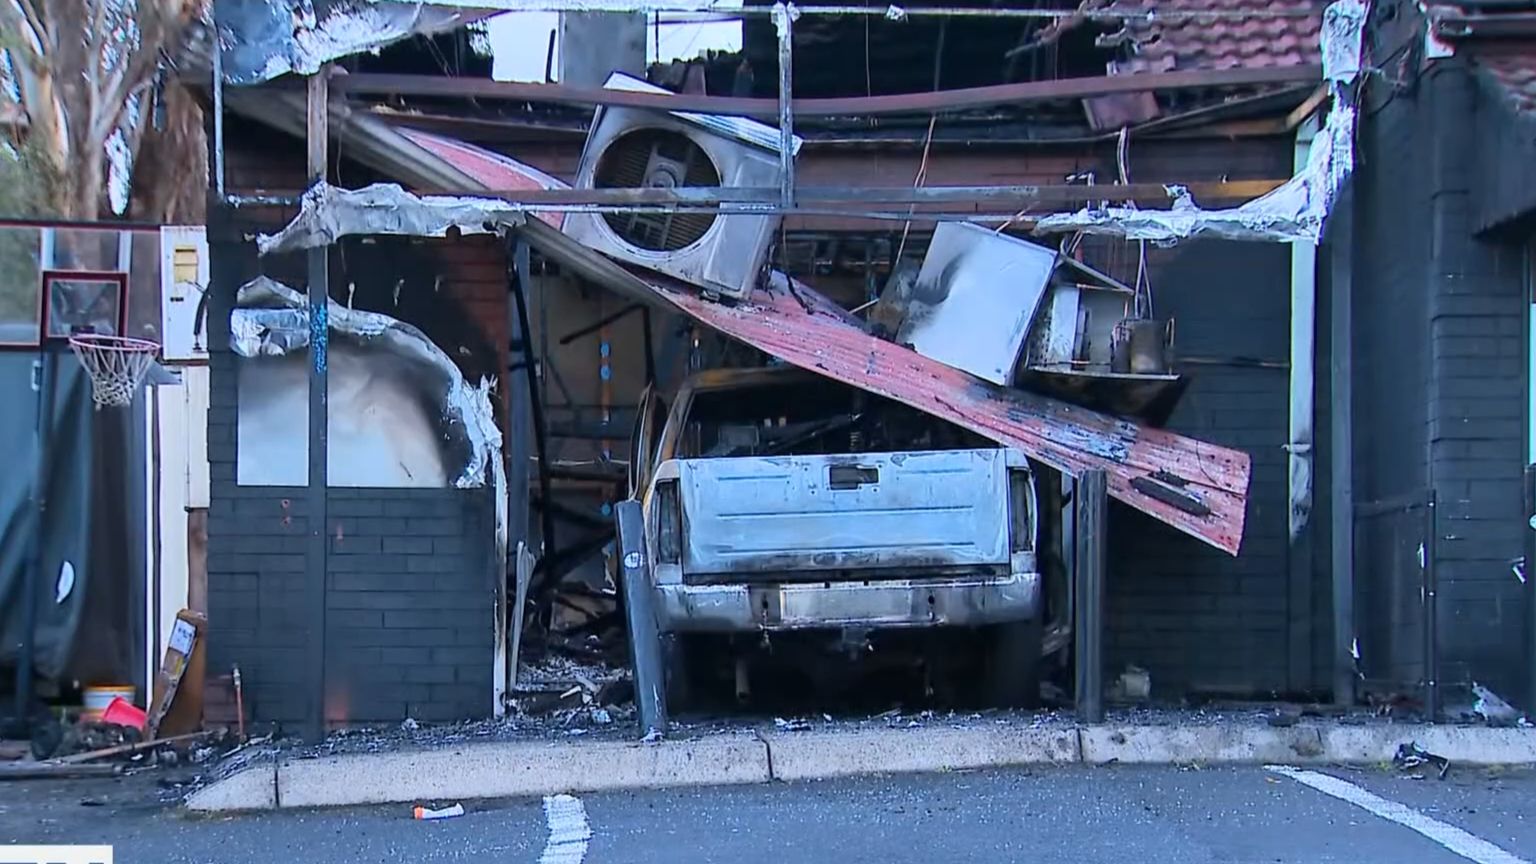 Businesses damaged in arson attack in Melbourne’s west